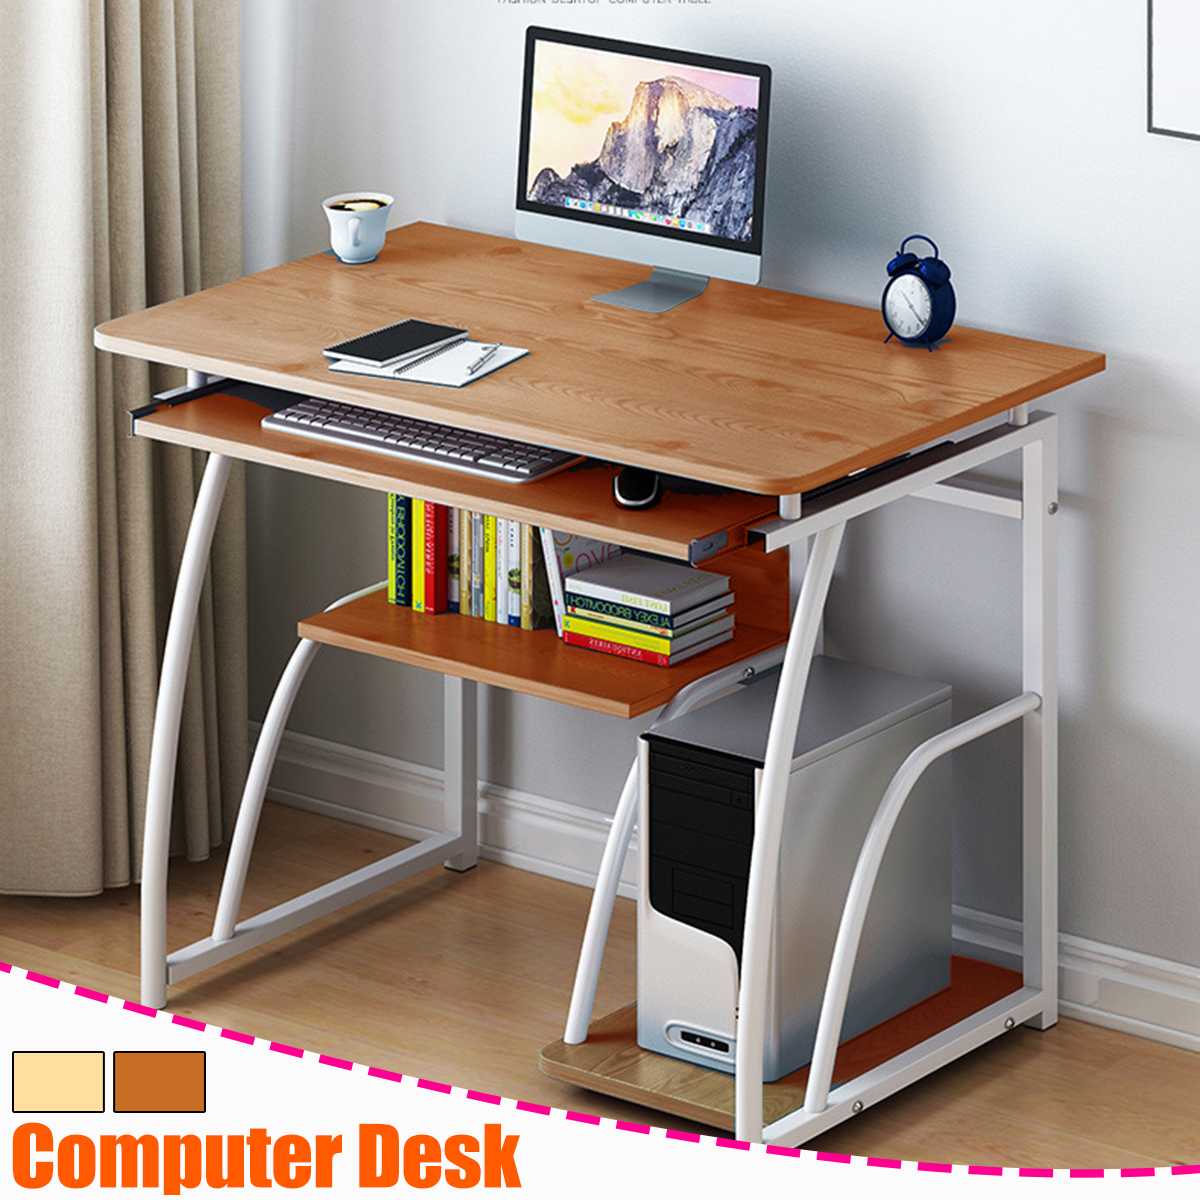 71X70cm Modern Computer Desk with Keyboard bracket PC Workstation Study Writing Table Home Office Furniture Table Office